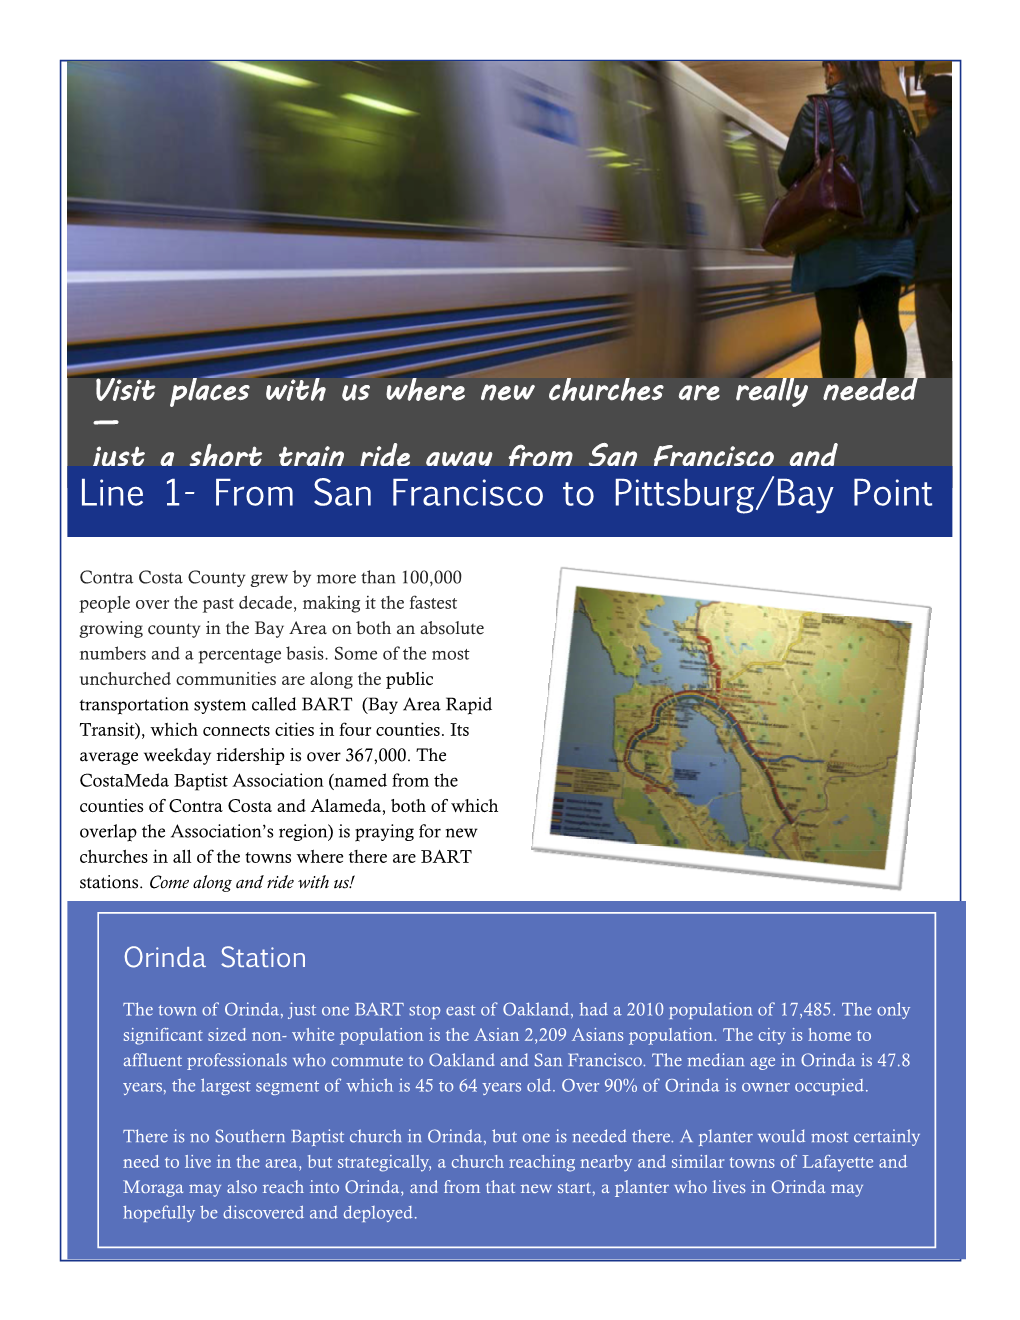 Line 1- from San Francisco to Pittsburg/Bay Point